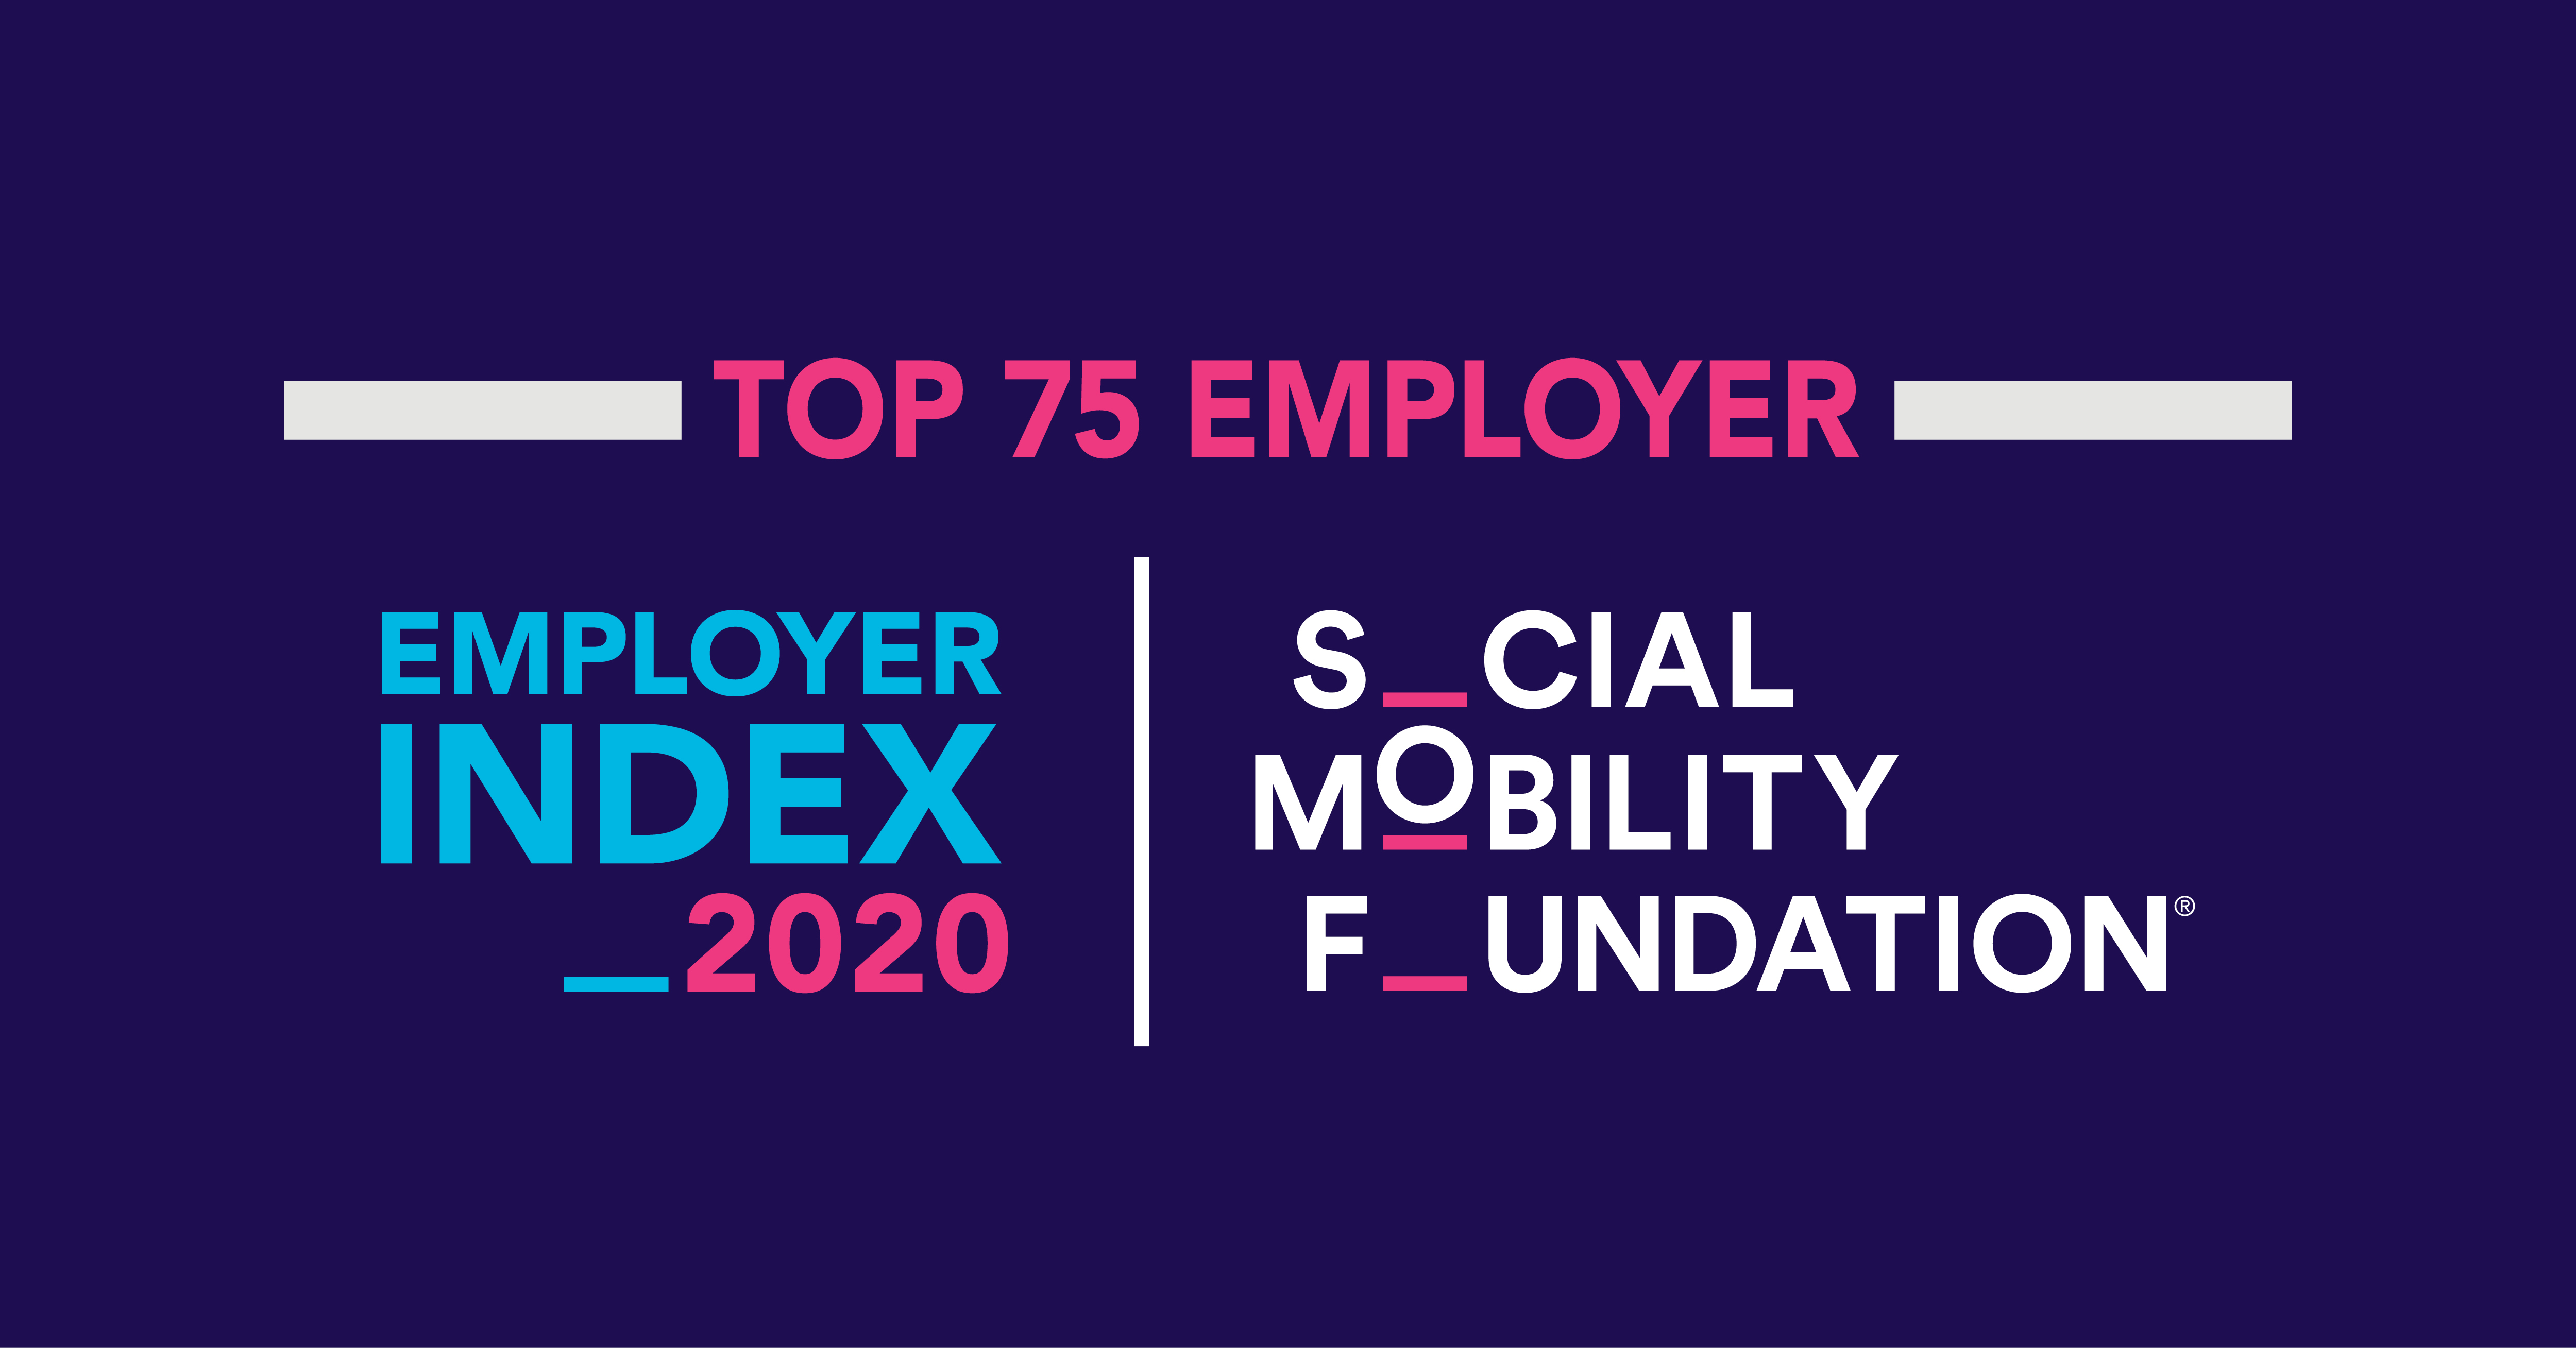 Enterprise ranked as a top Social Mobility Employer for fourth consecutive year